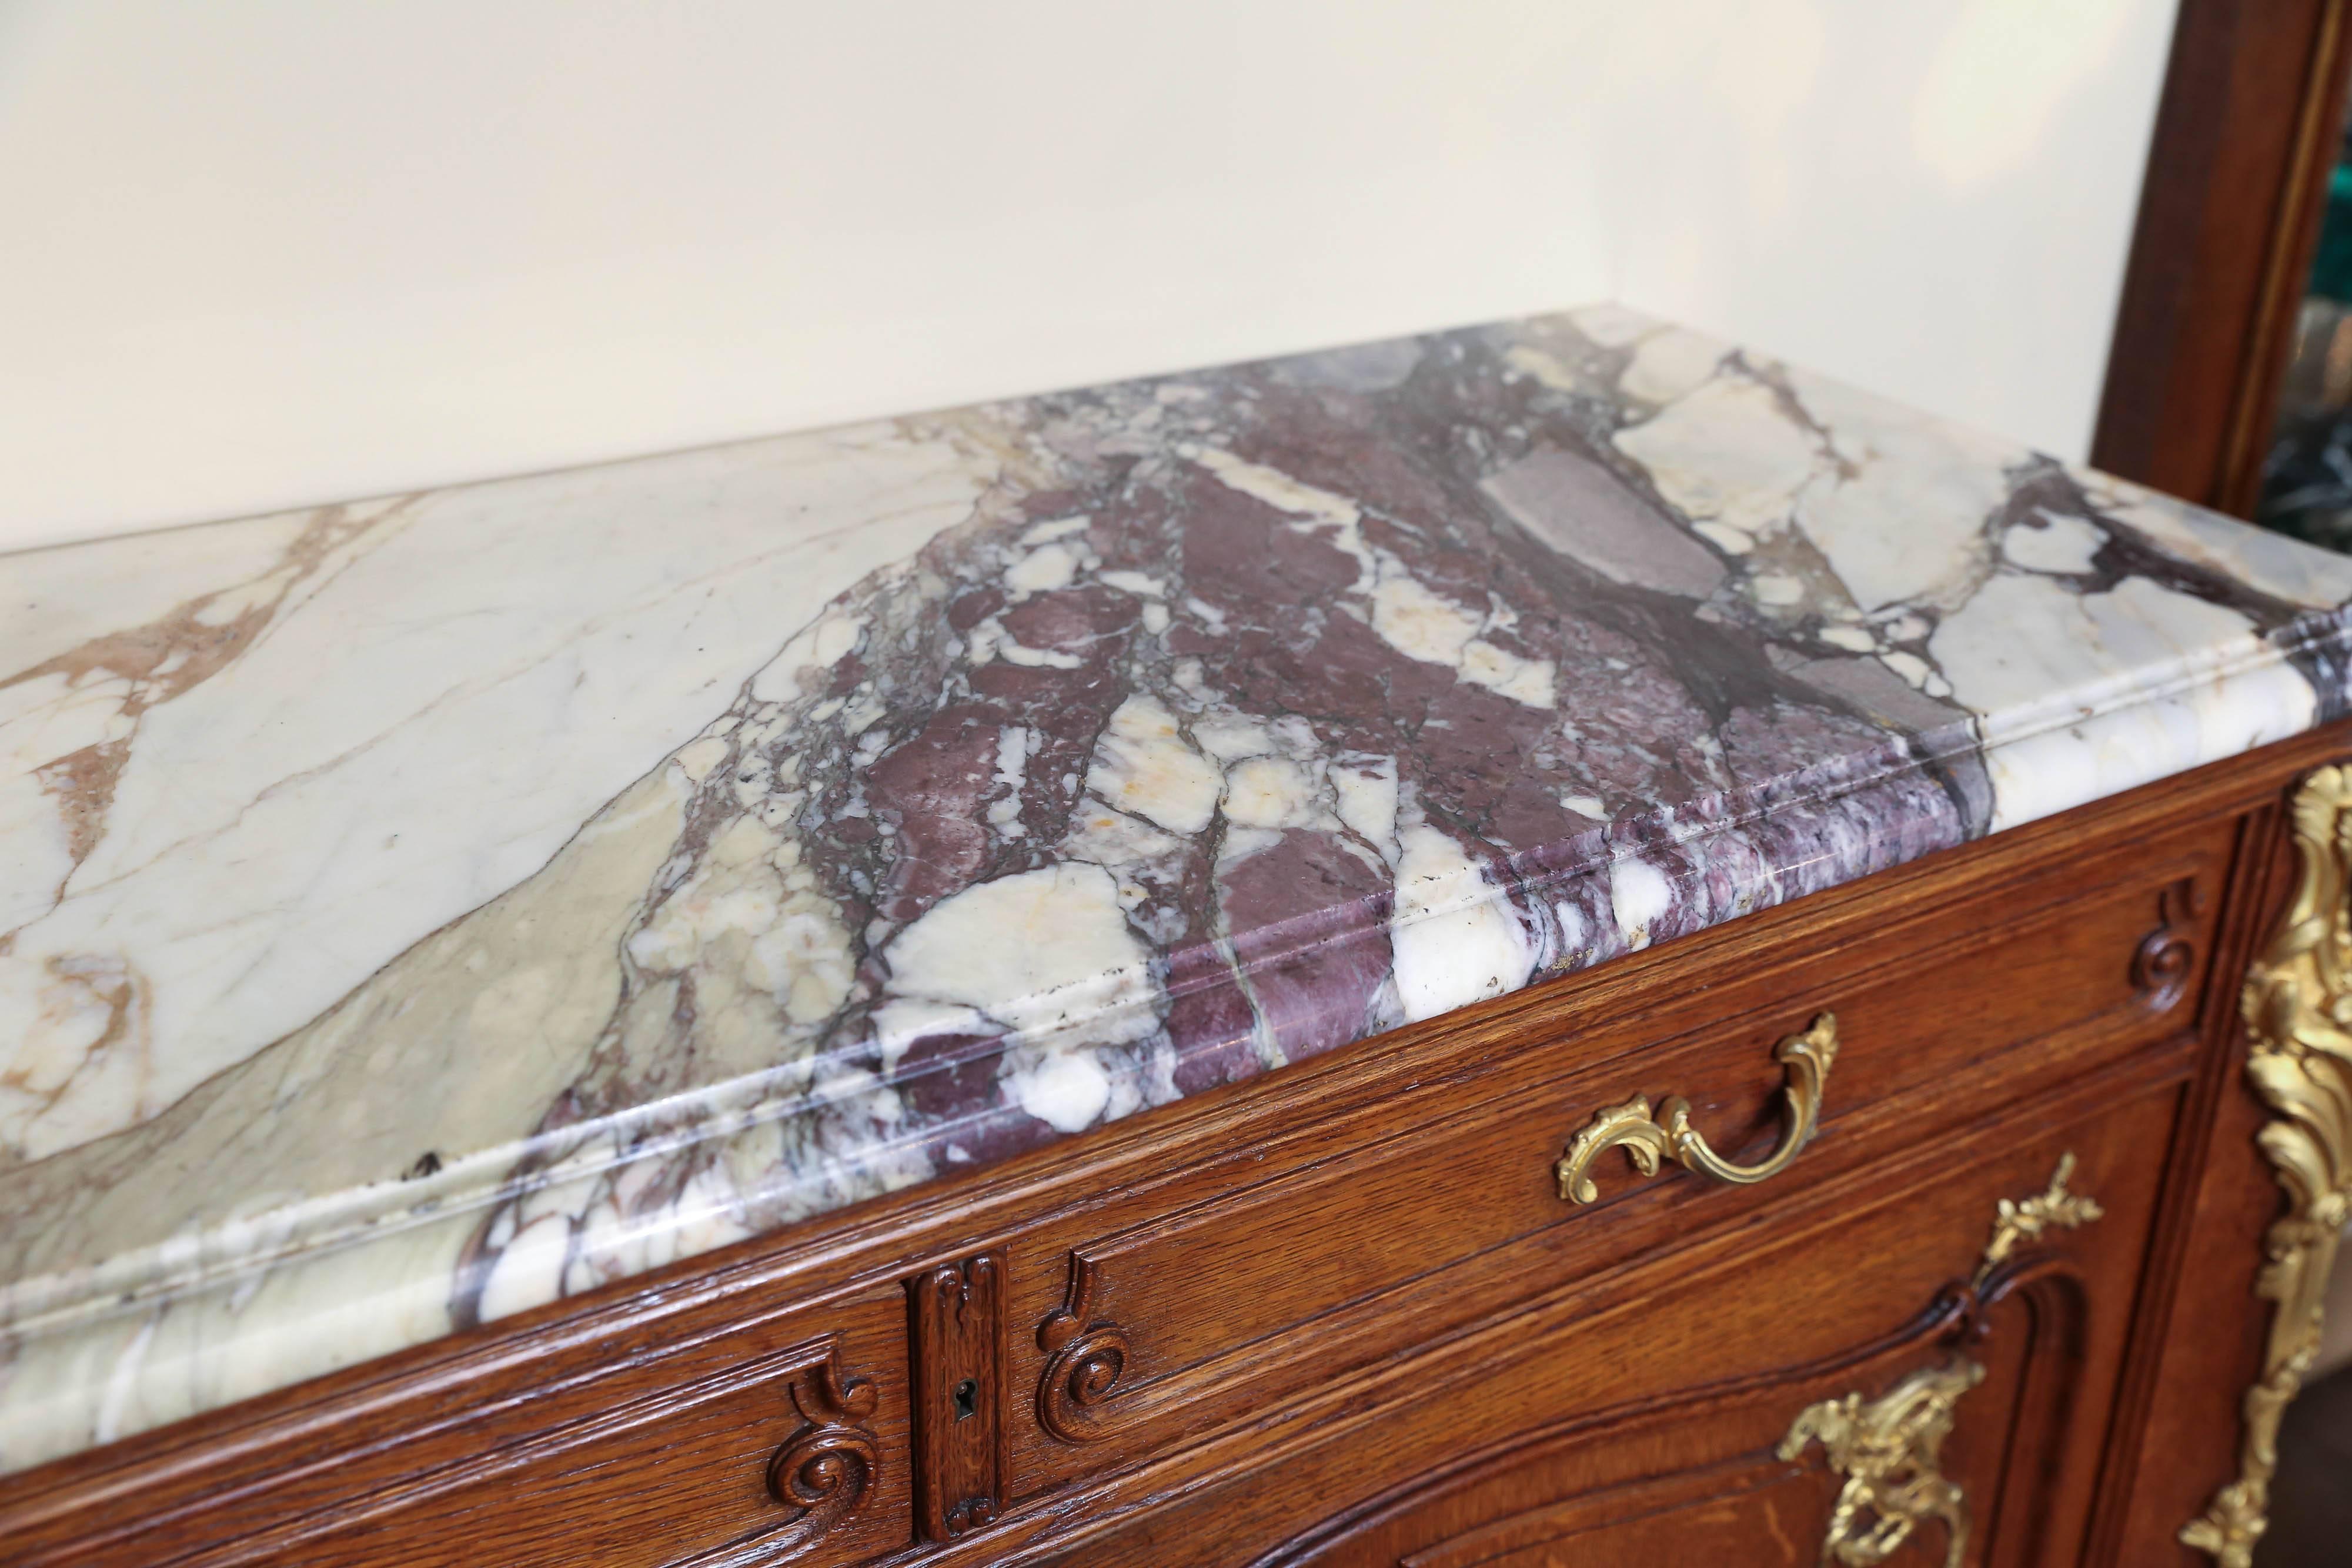 Early 20th century, marble-top with projecting rounded corners, above
a conforming case fitted with two drawers over two cupboard doors,
all inset with shaped panels, raised on splayed legs and sabots, the
back bearing the stamp “Haentges Fres.